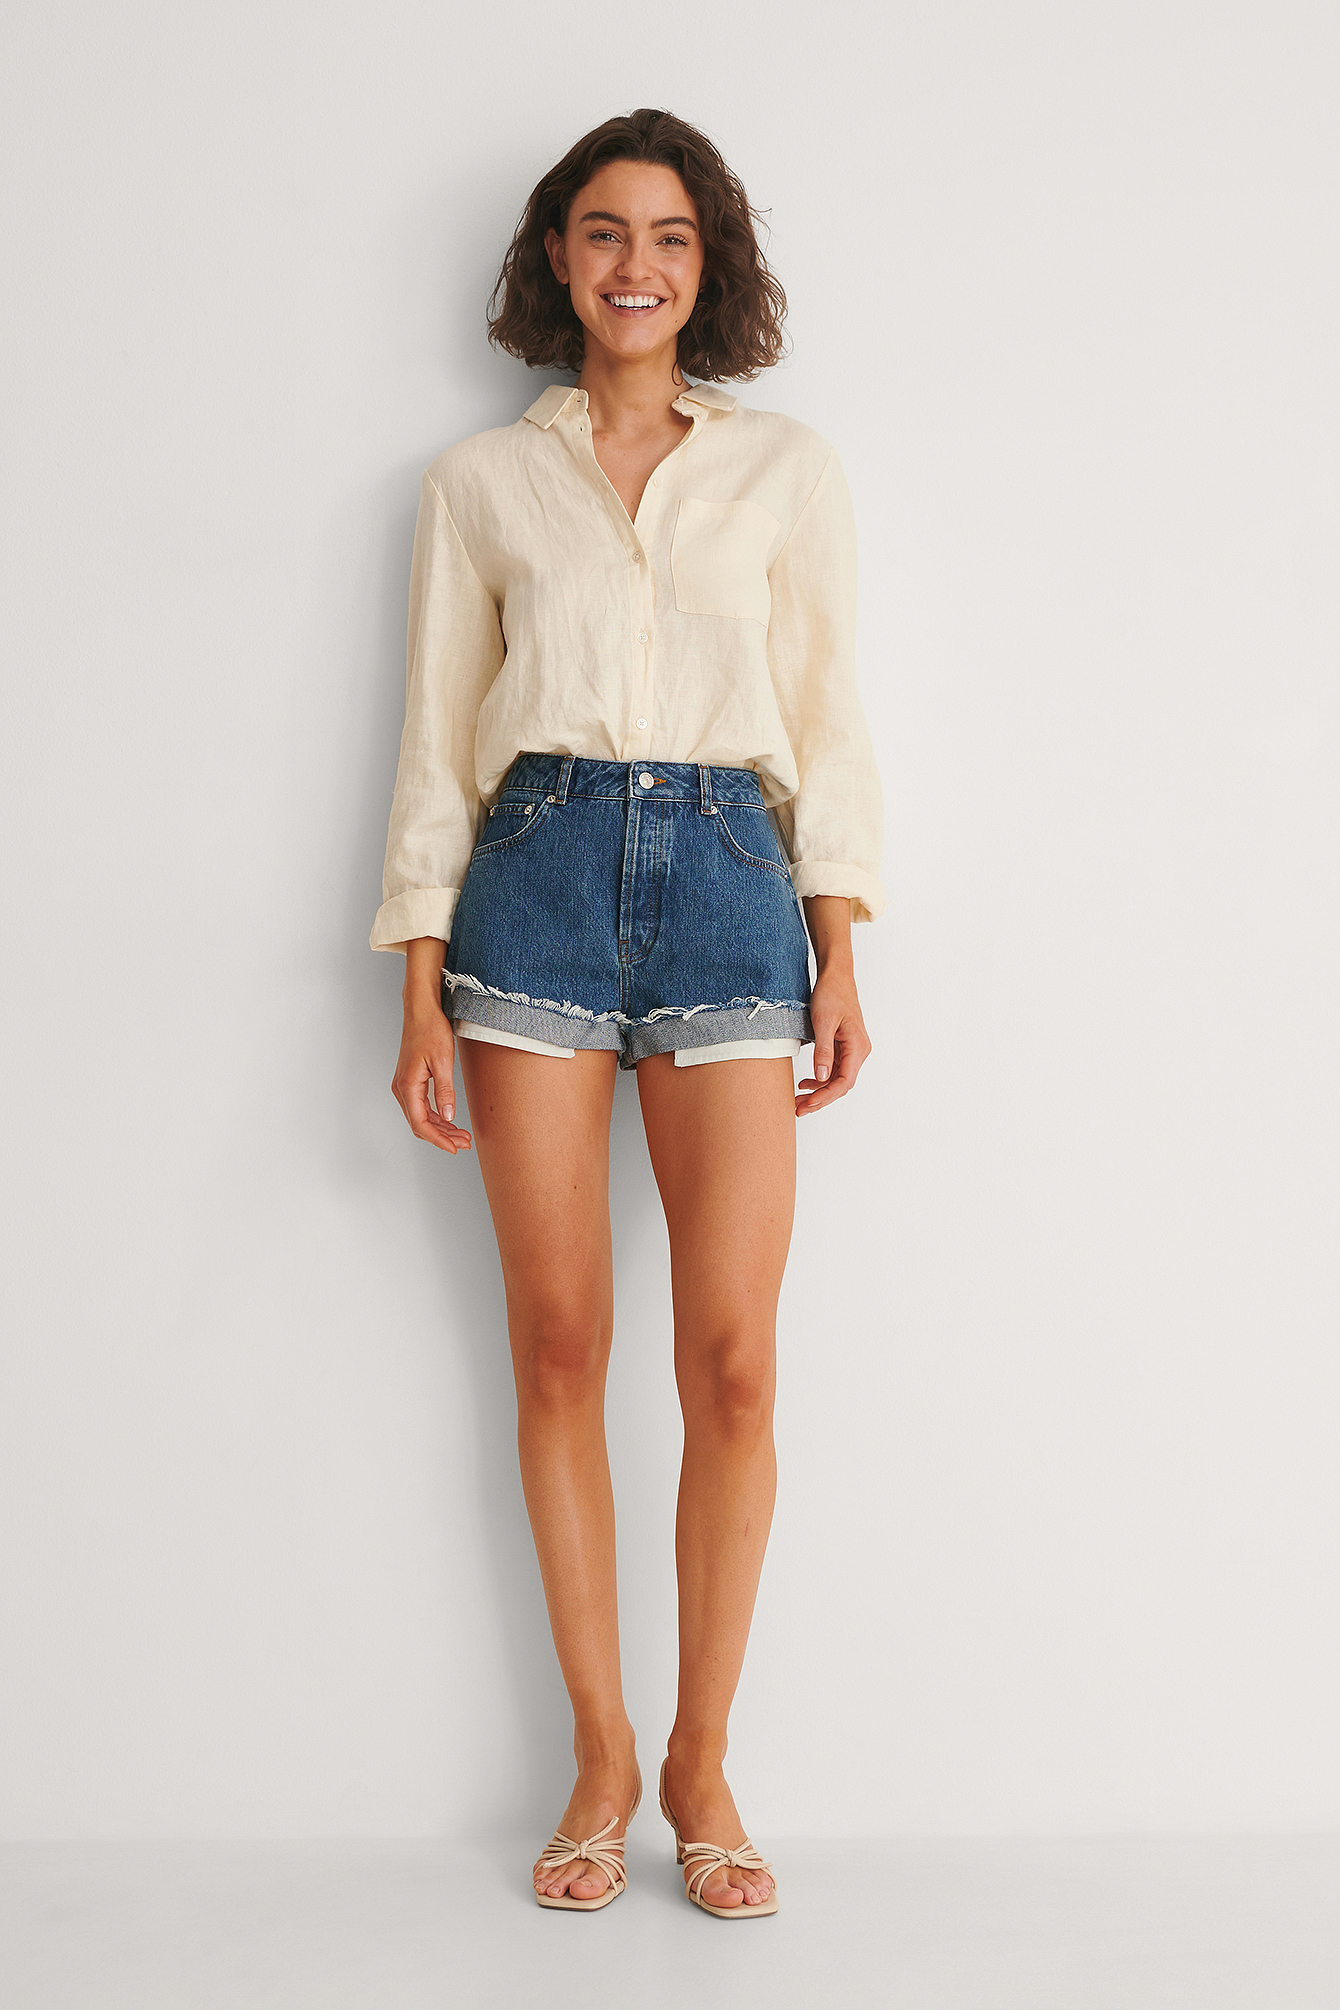 Vintage Look Fold Up Denim Shorts Outfit.